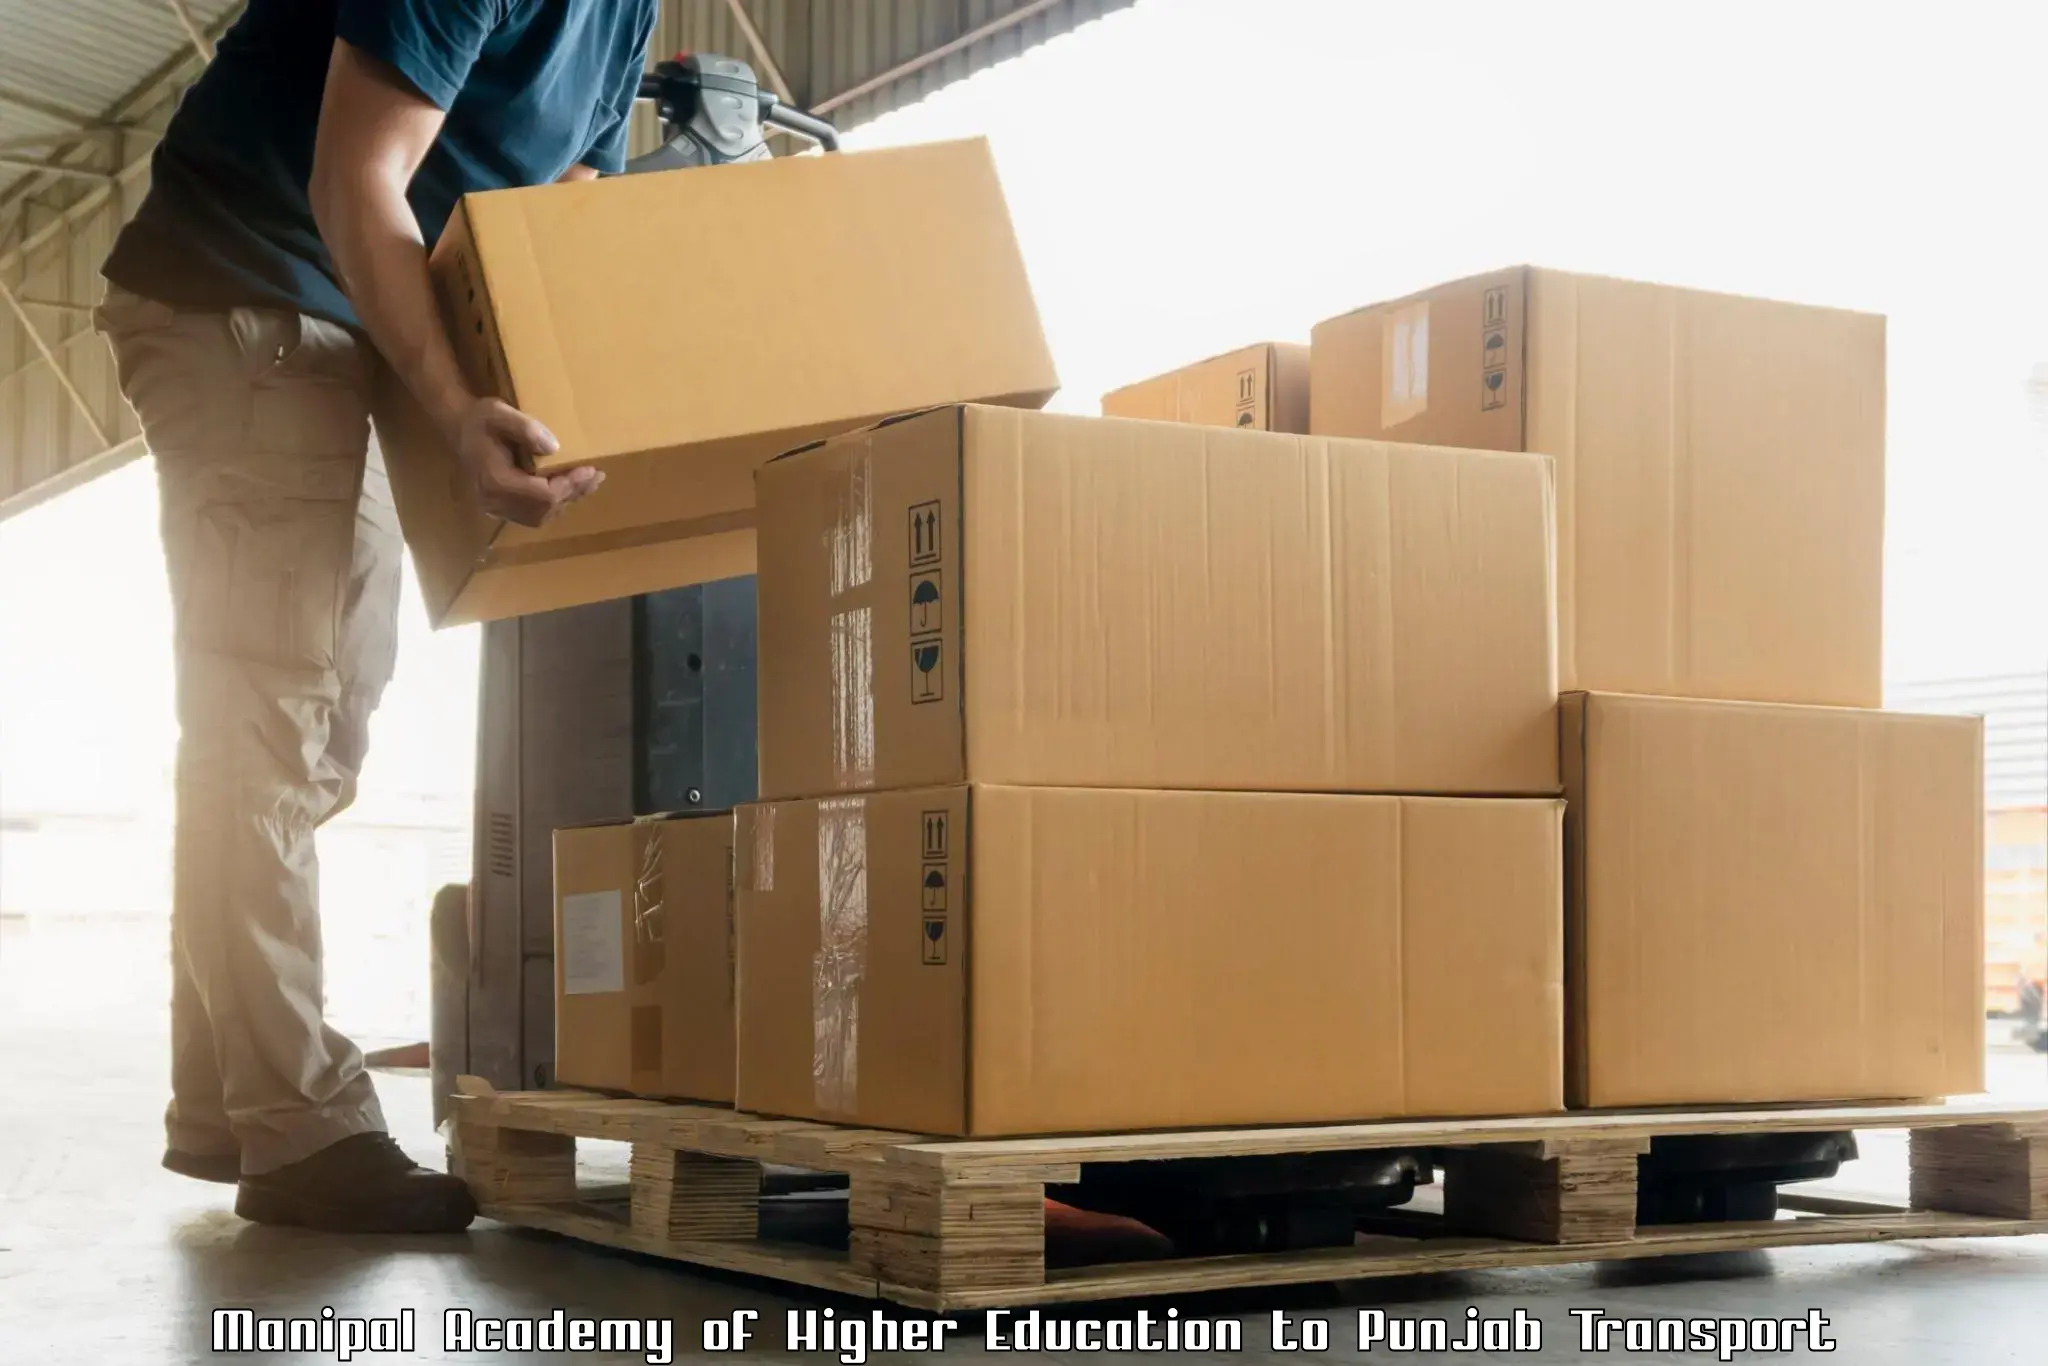 Cargo transport services Manipal Academy of Higher Education to Sultanpur Lodhi